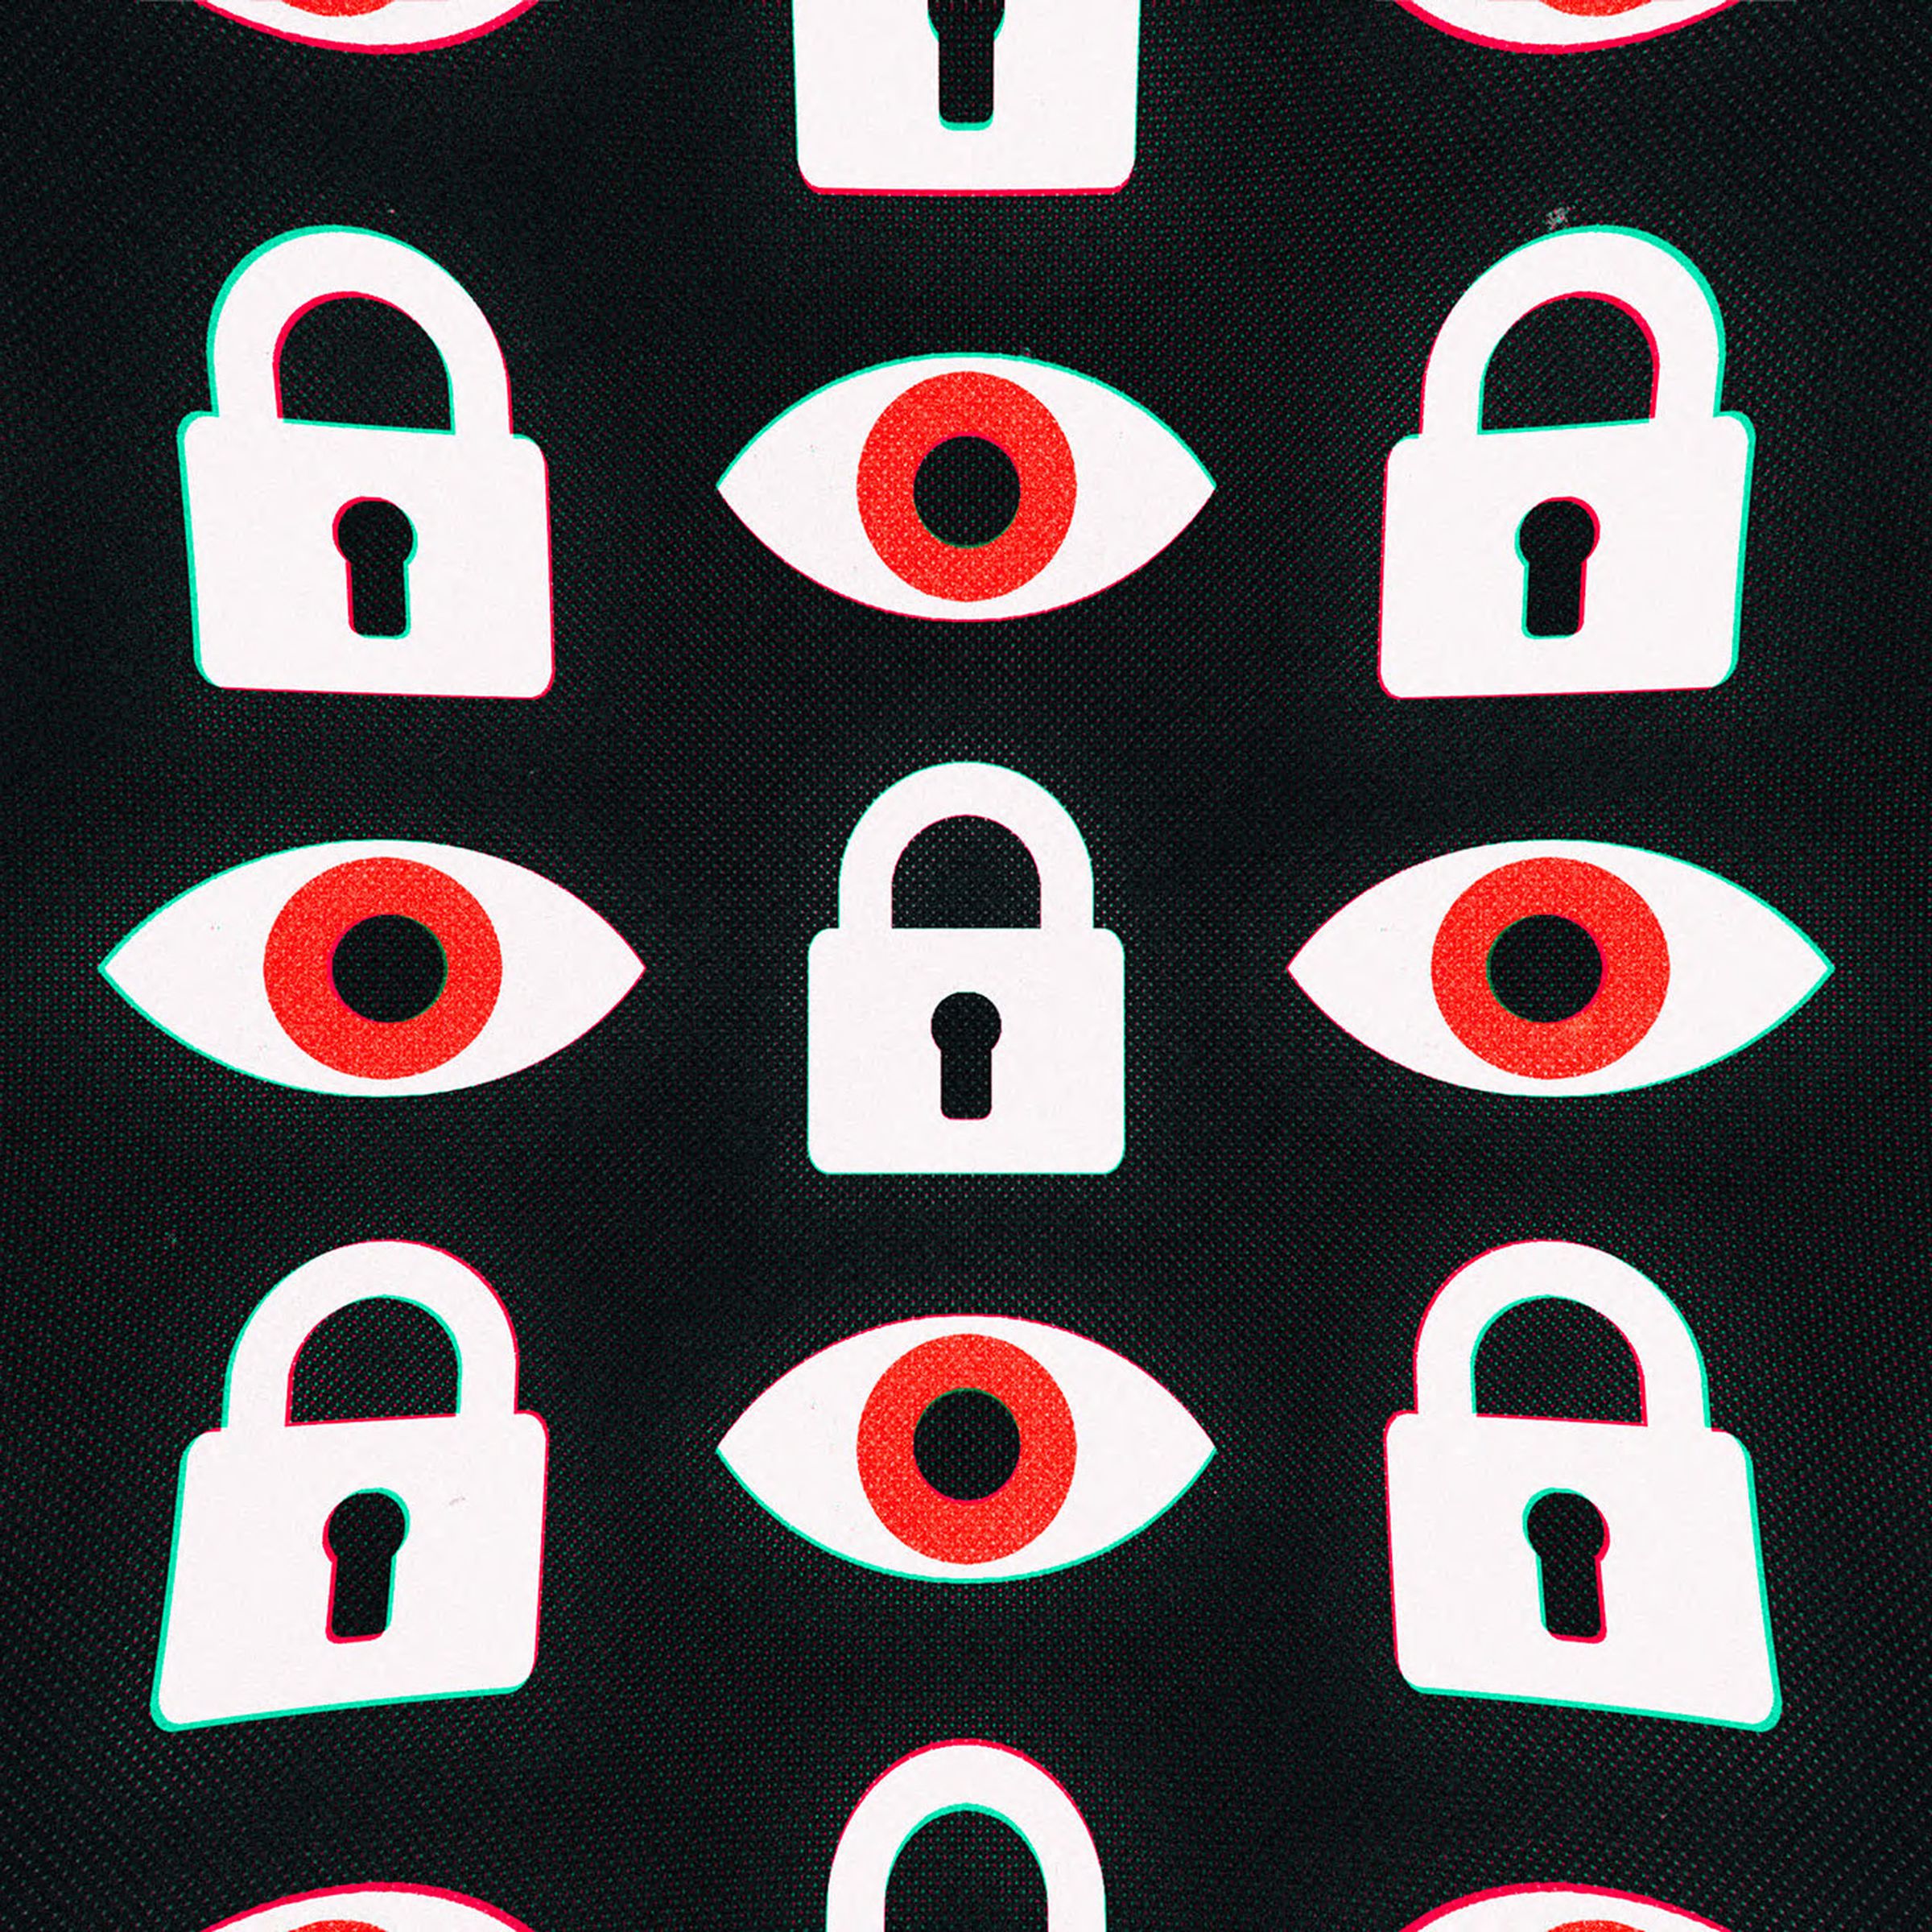 An illustration featuring eyes and locks